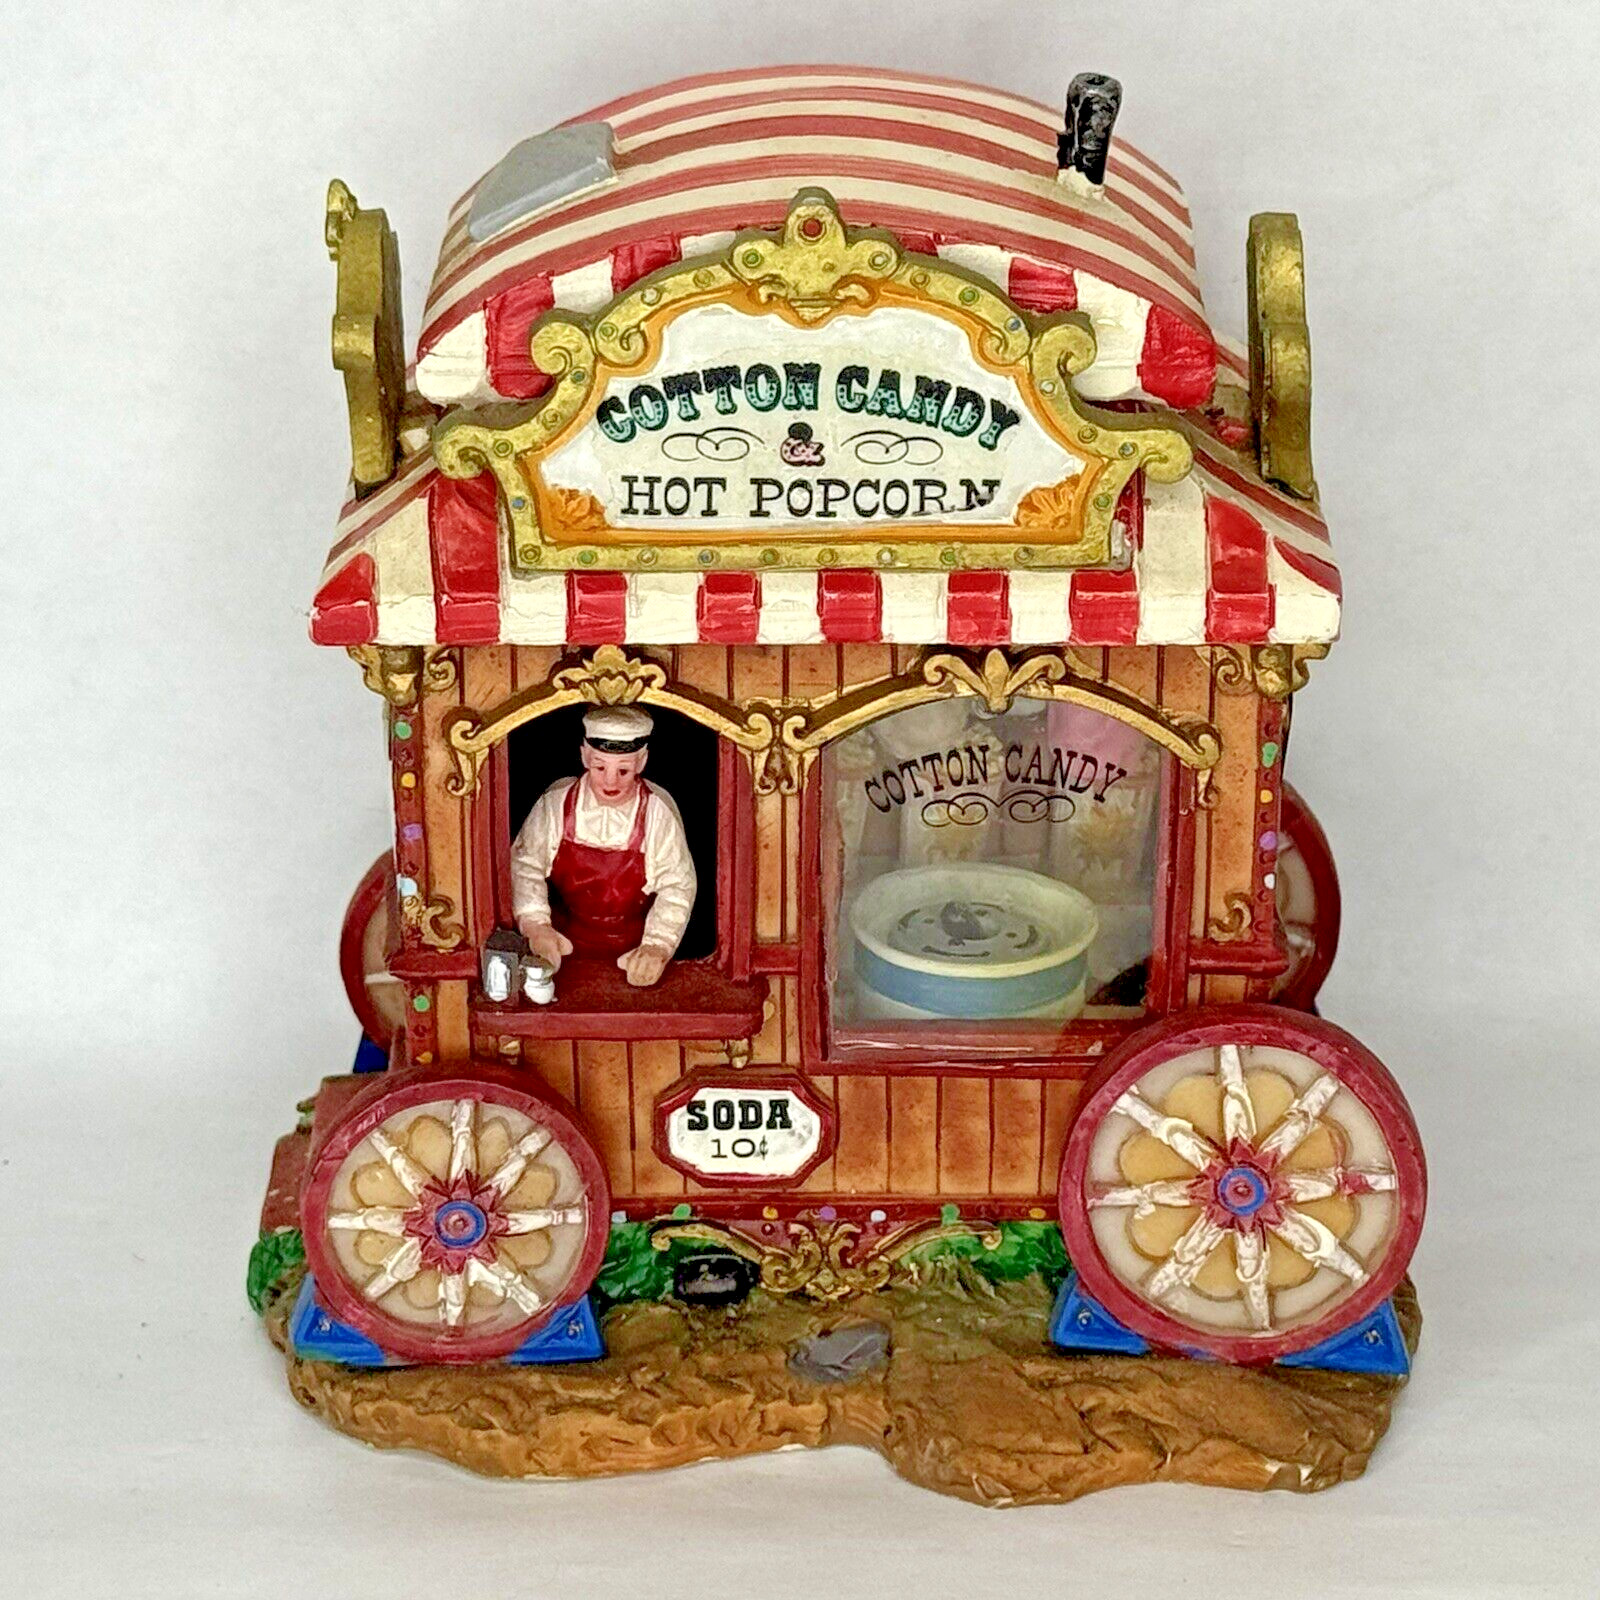 LEMAX Christmas Village Collection Cotton Candy Popcorn Stand Holiday